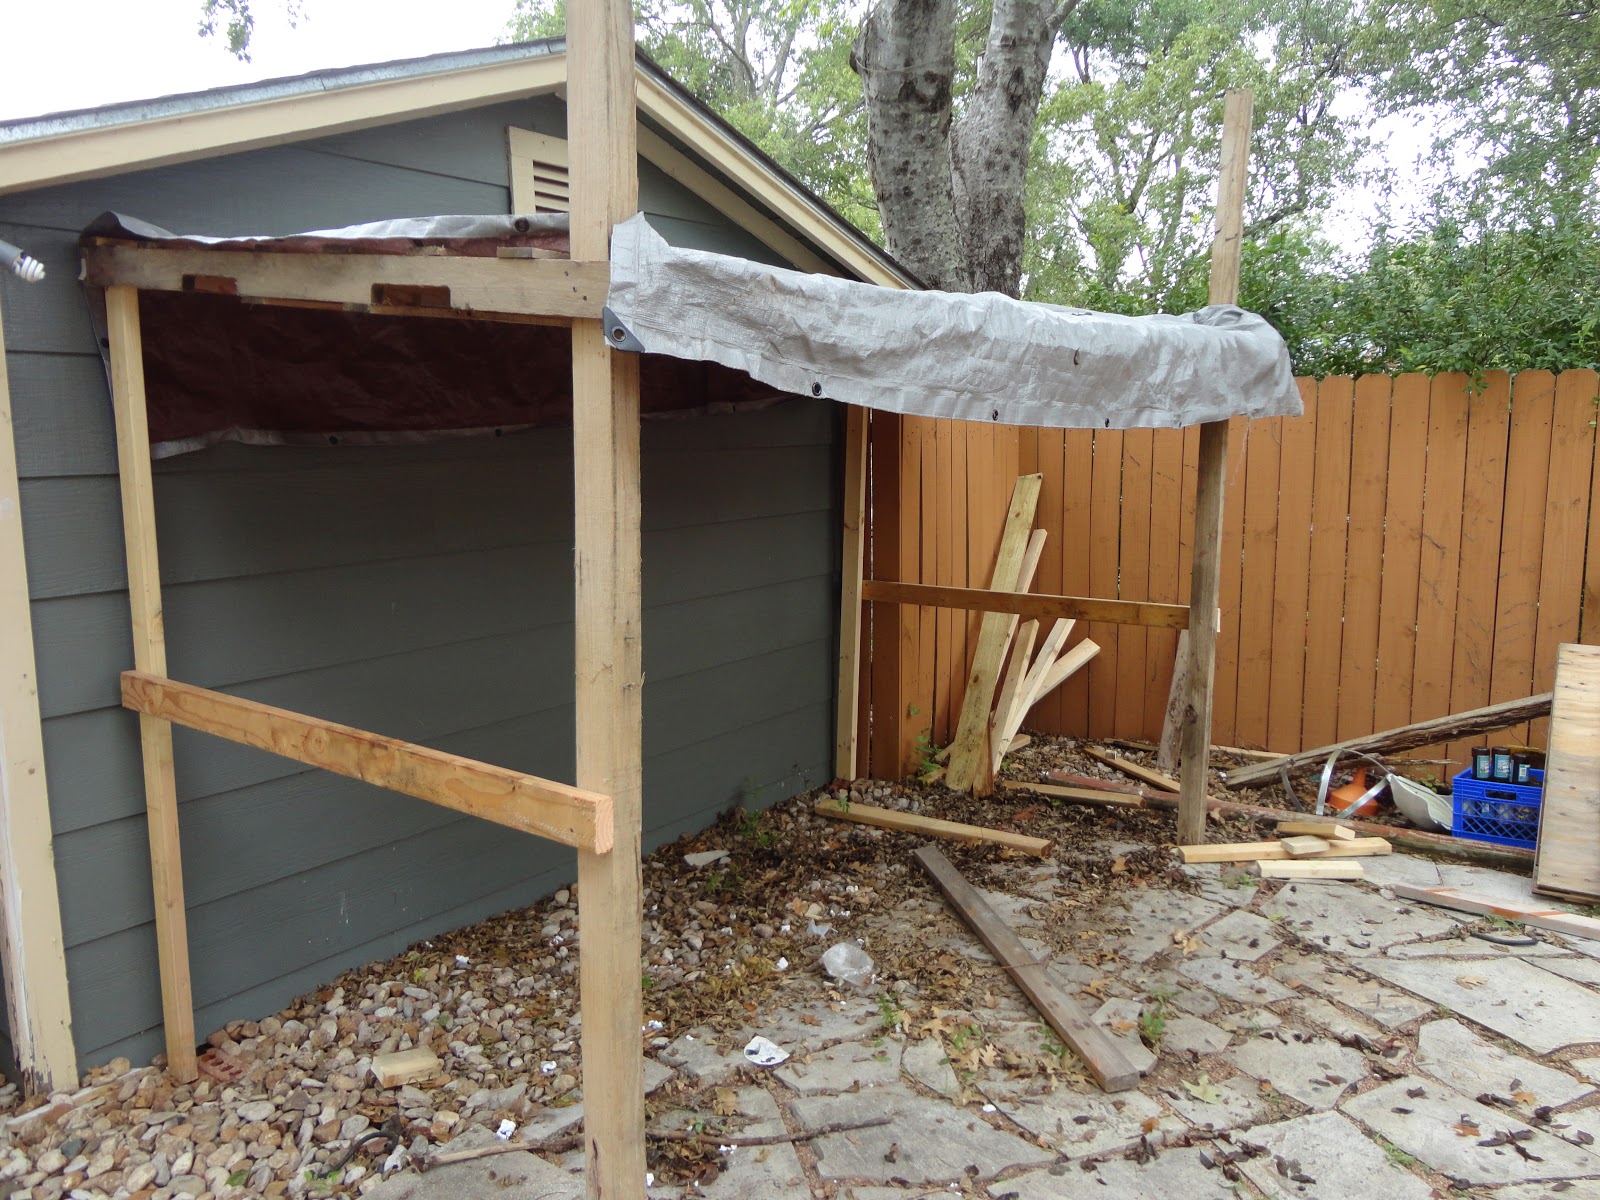 Fast, Cheap and Out of Control: Build your own 'free' pallet shed